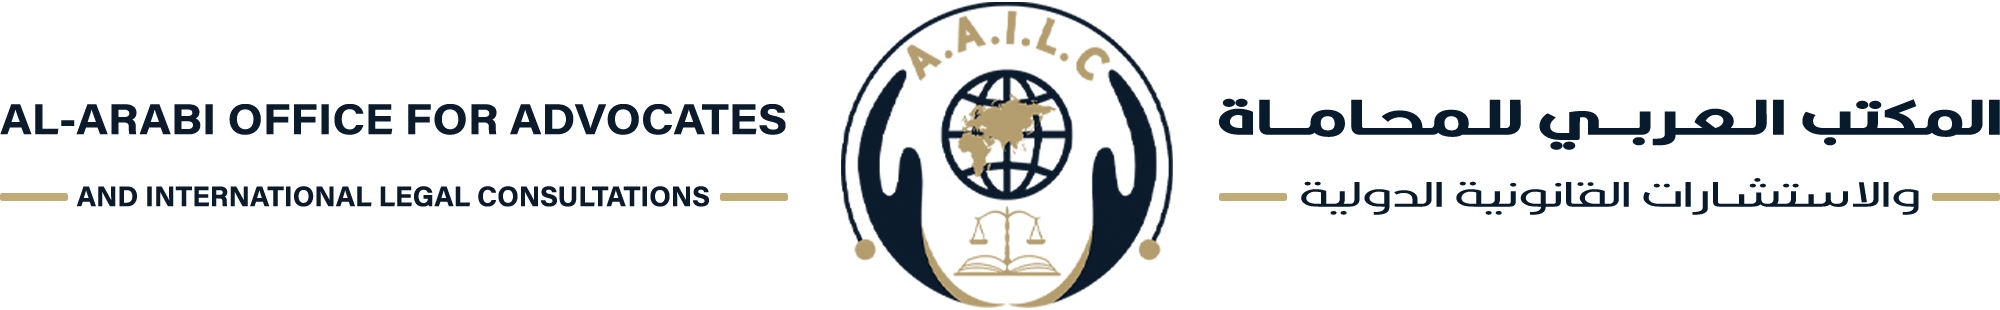 aailc.co